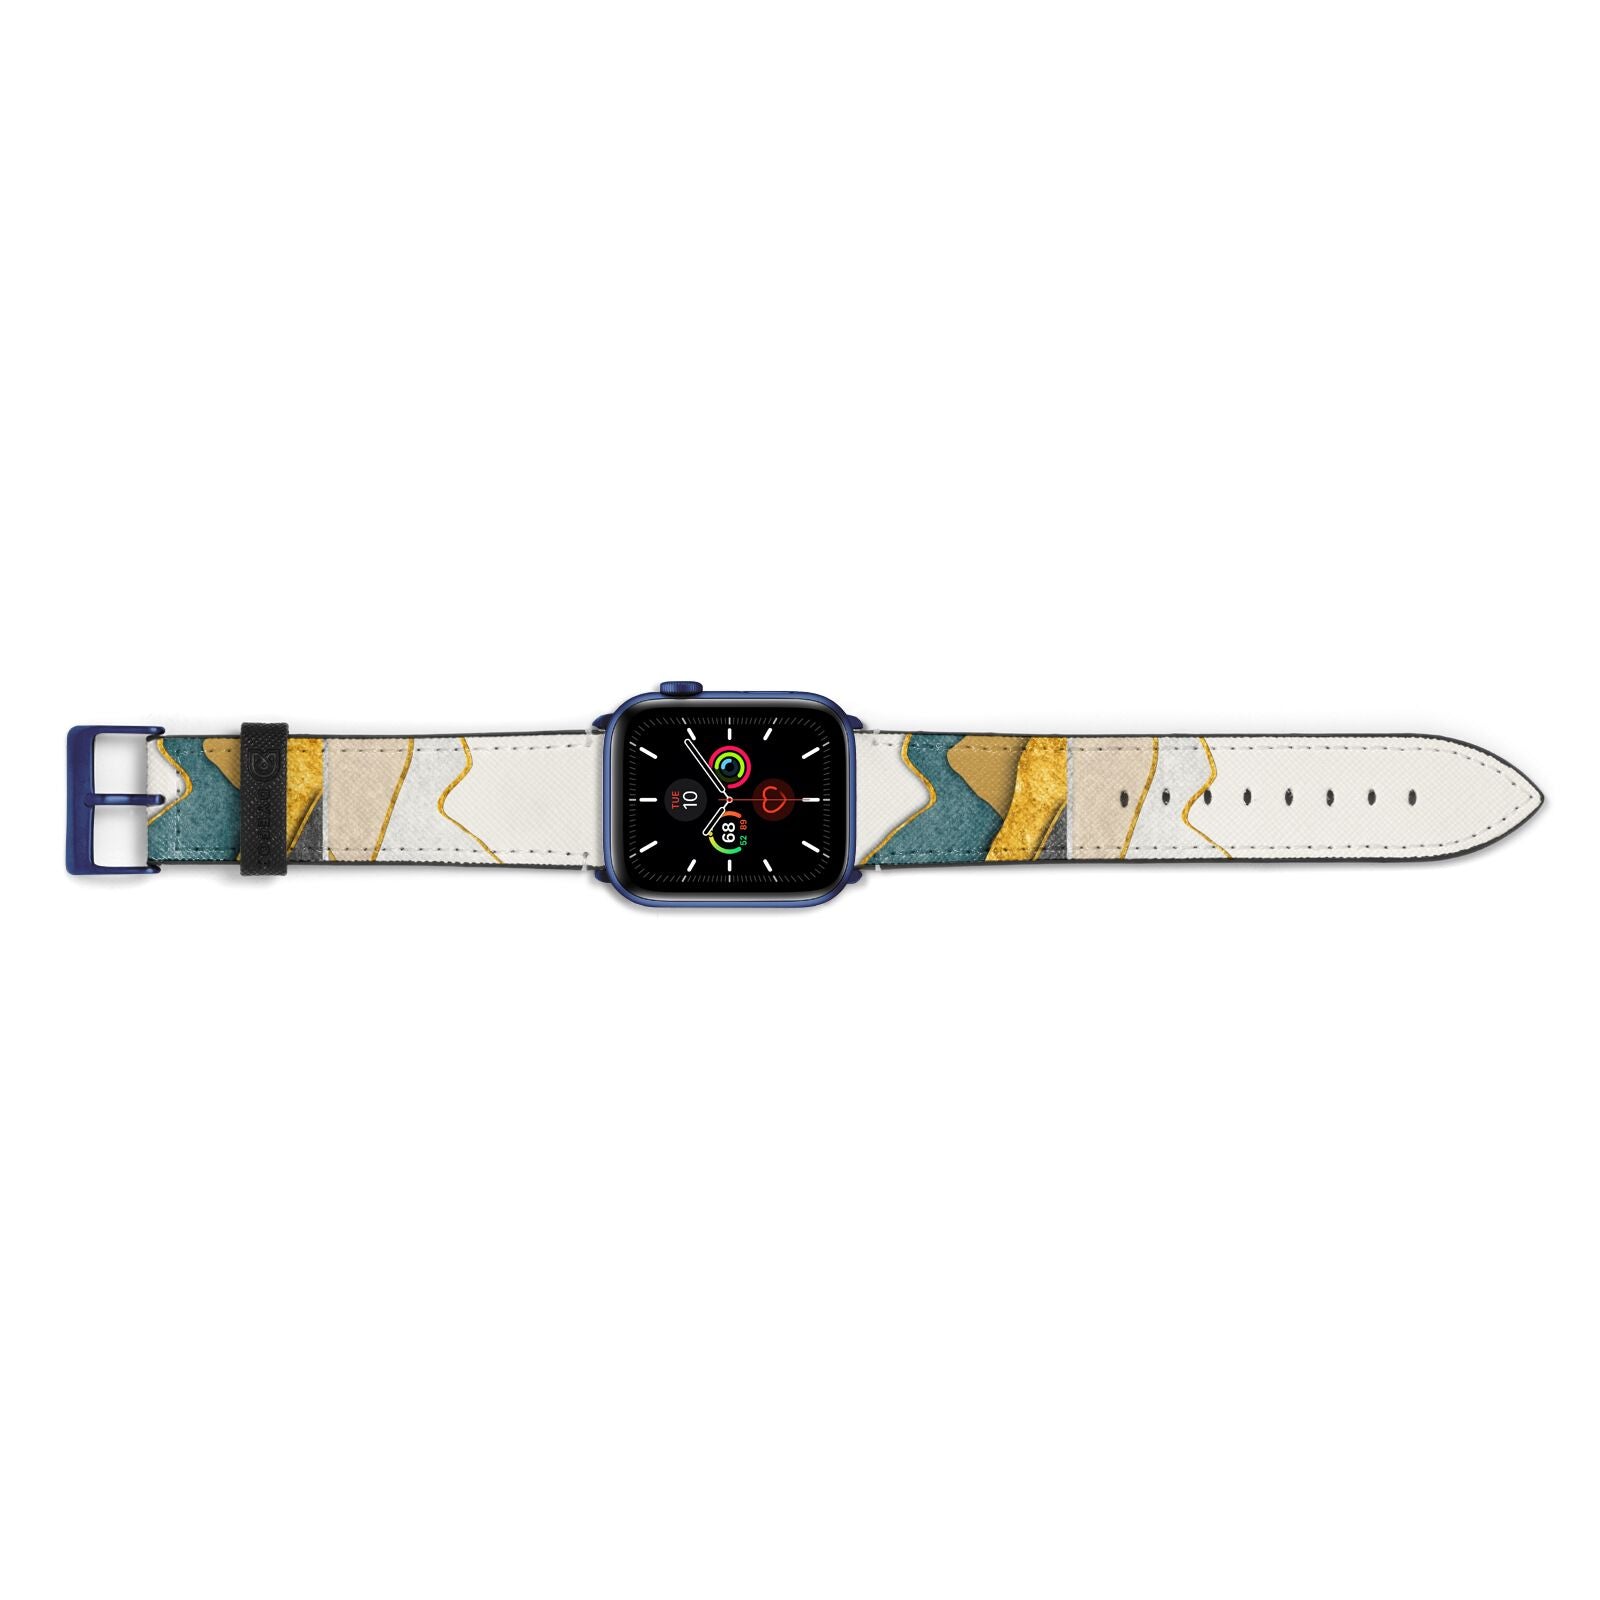 Abstract Mountain Apple Watch Strap Landscape Image Blue Hardware